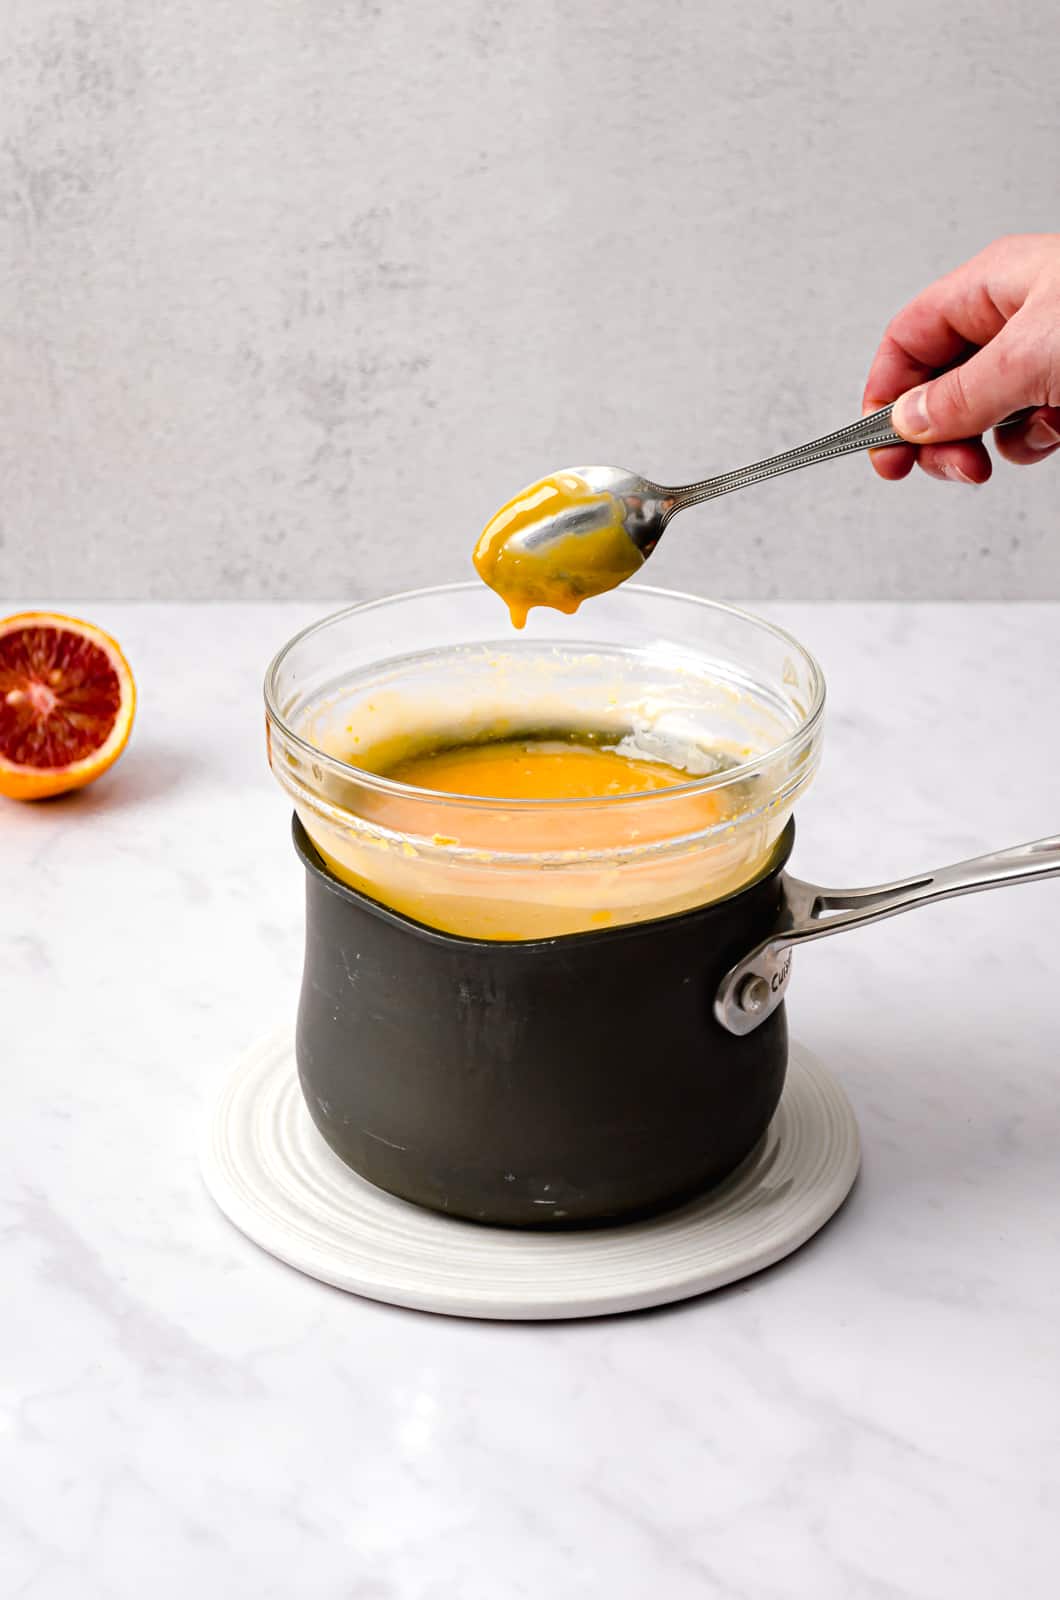 double boiler with blood orange curd and spoon.